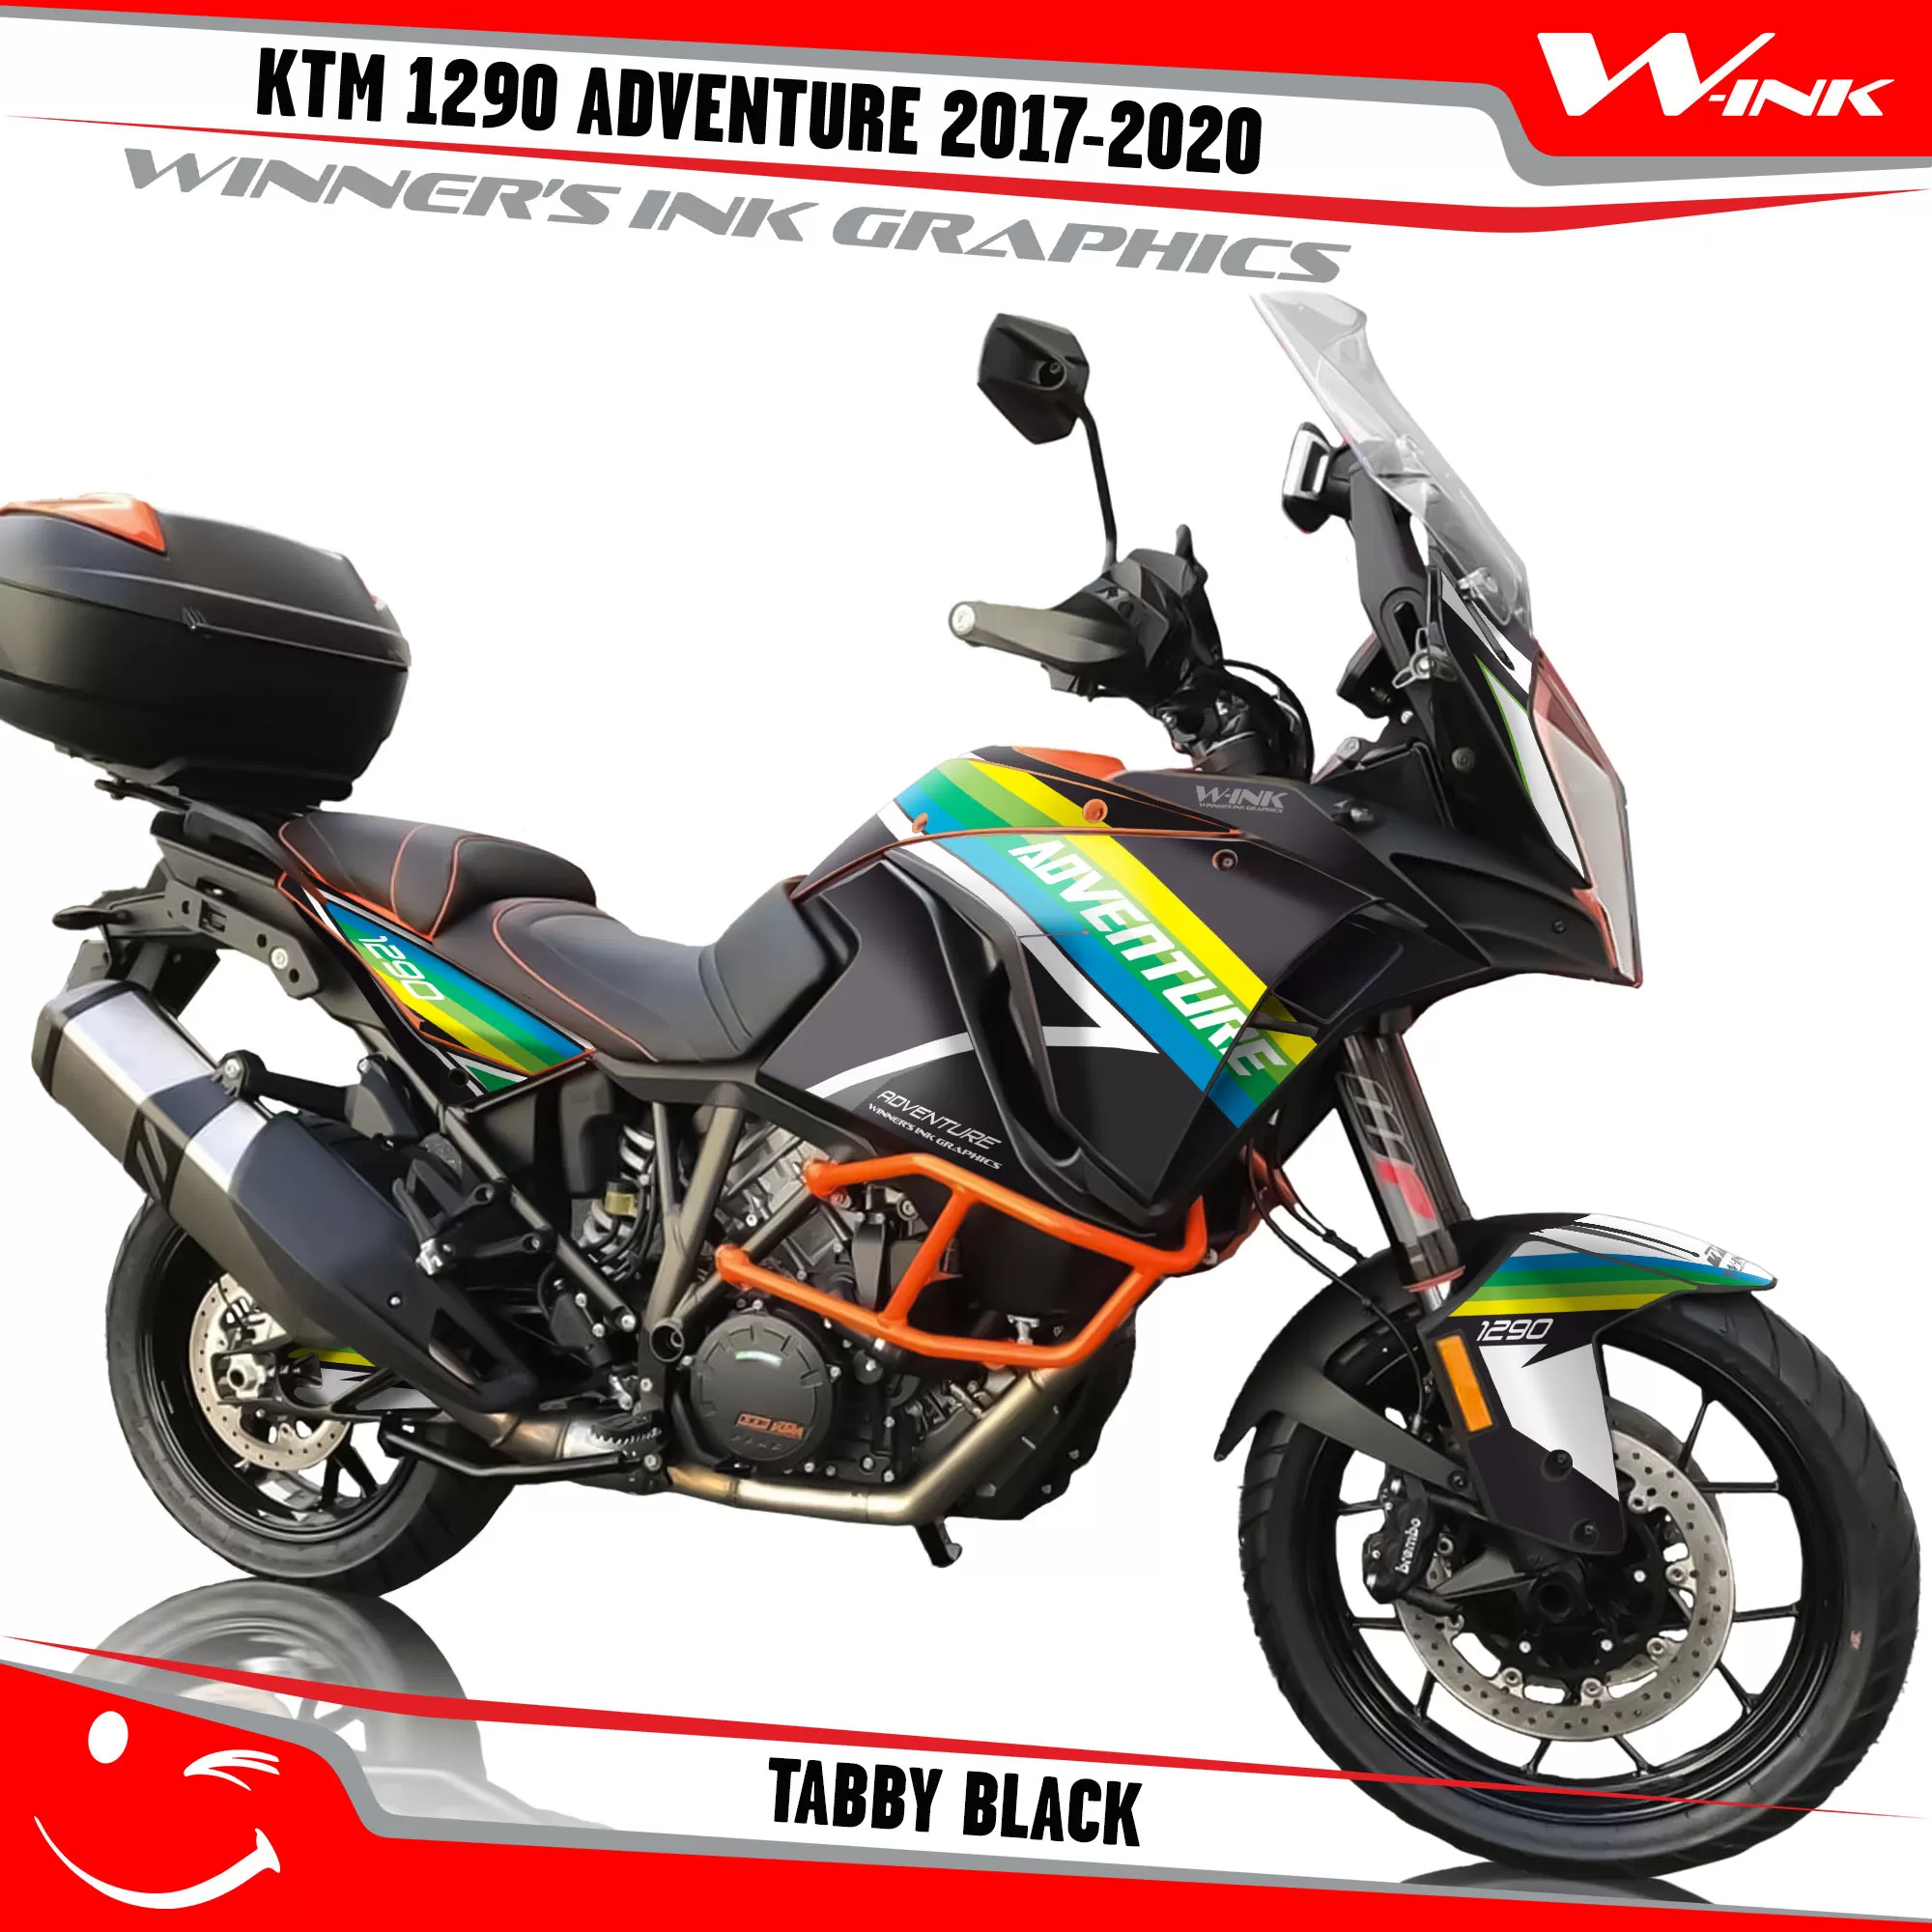 KTM-Adventure-1290-2017-2018-2019-2020-graphics-kit-and-decals-Tabby-Black